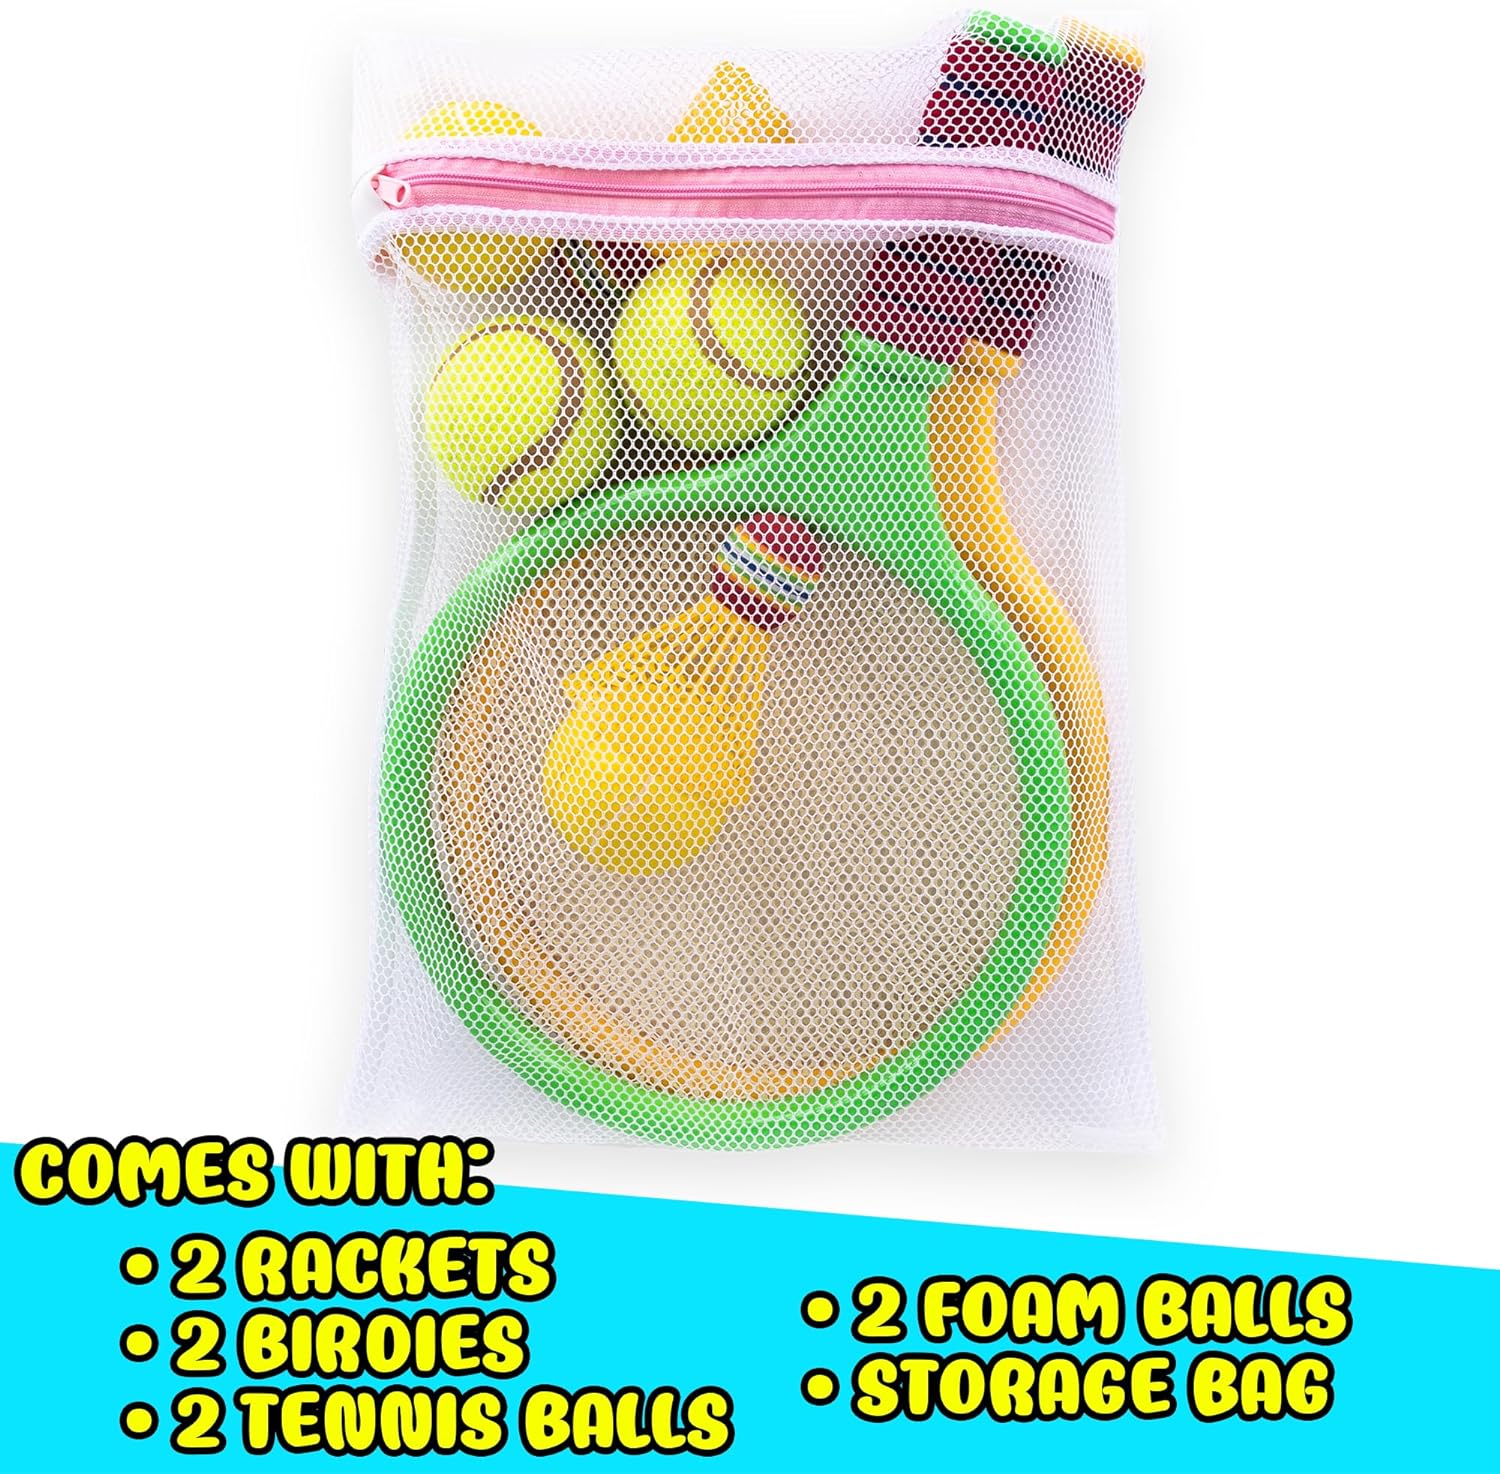 ArtCreativity Kids Badminton Rackets Set - 9 Piece Badminton Set with 2 Rackets, 2 Bridies, 2 Soft Balls, 2 Tennis Balls, and Storage Bag - Toy Badminton and Tennis Rackets for Kids with Accessories